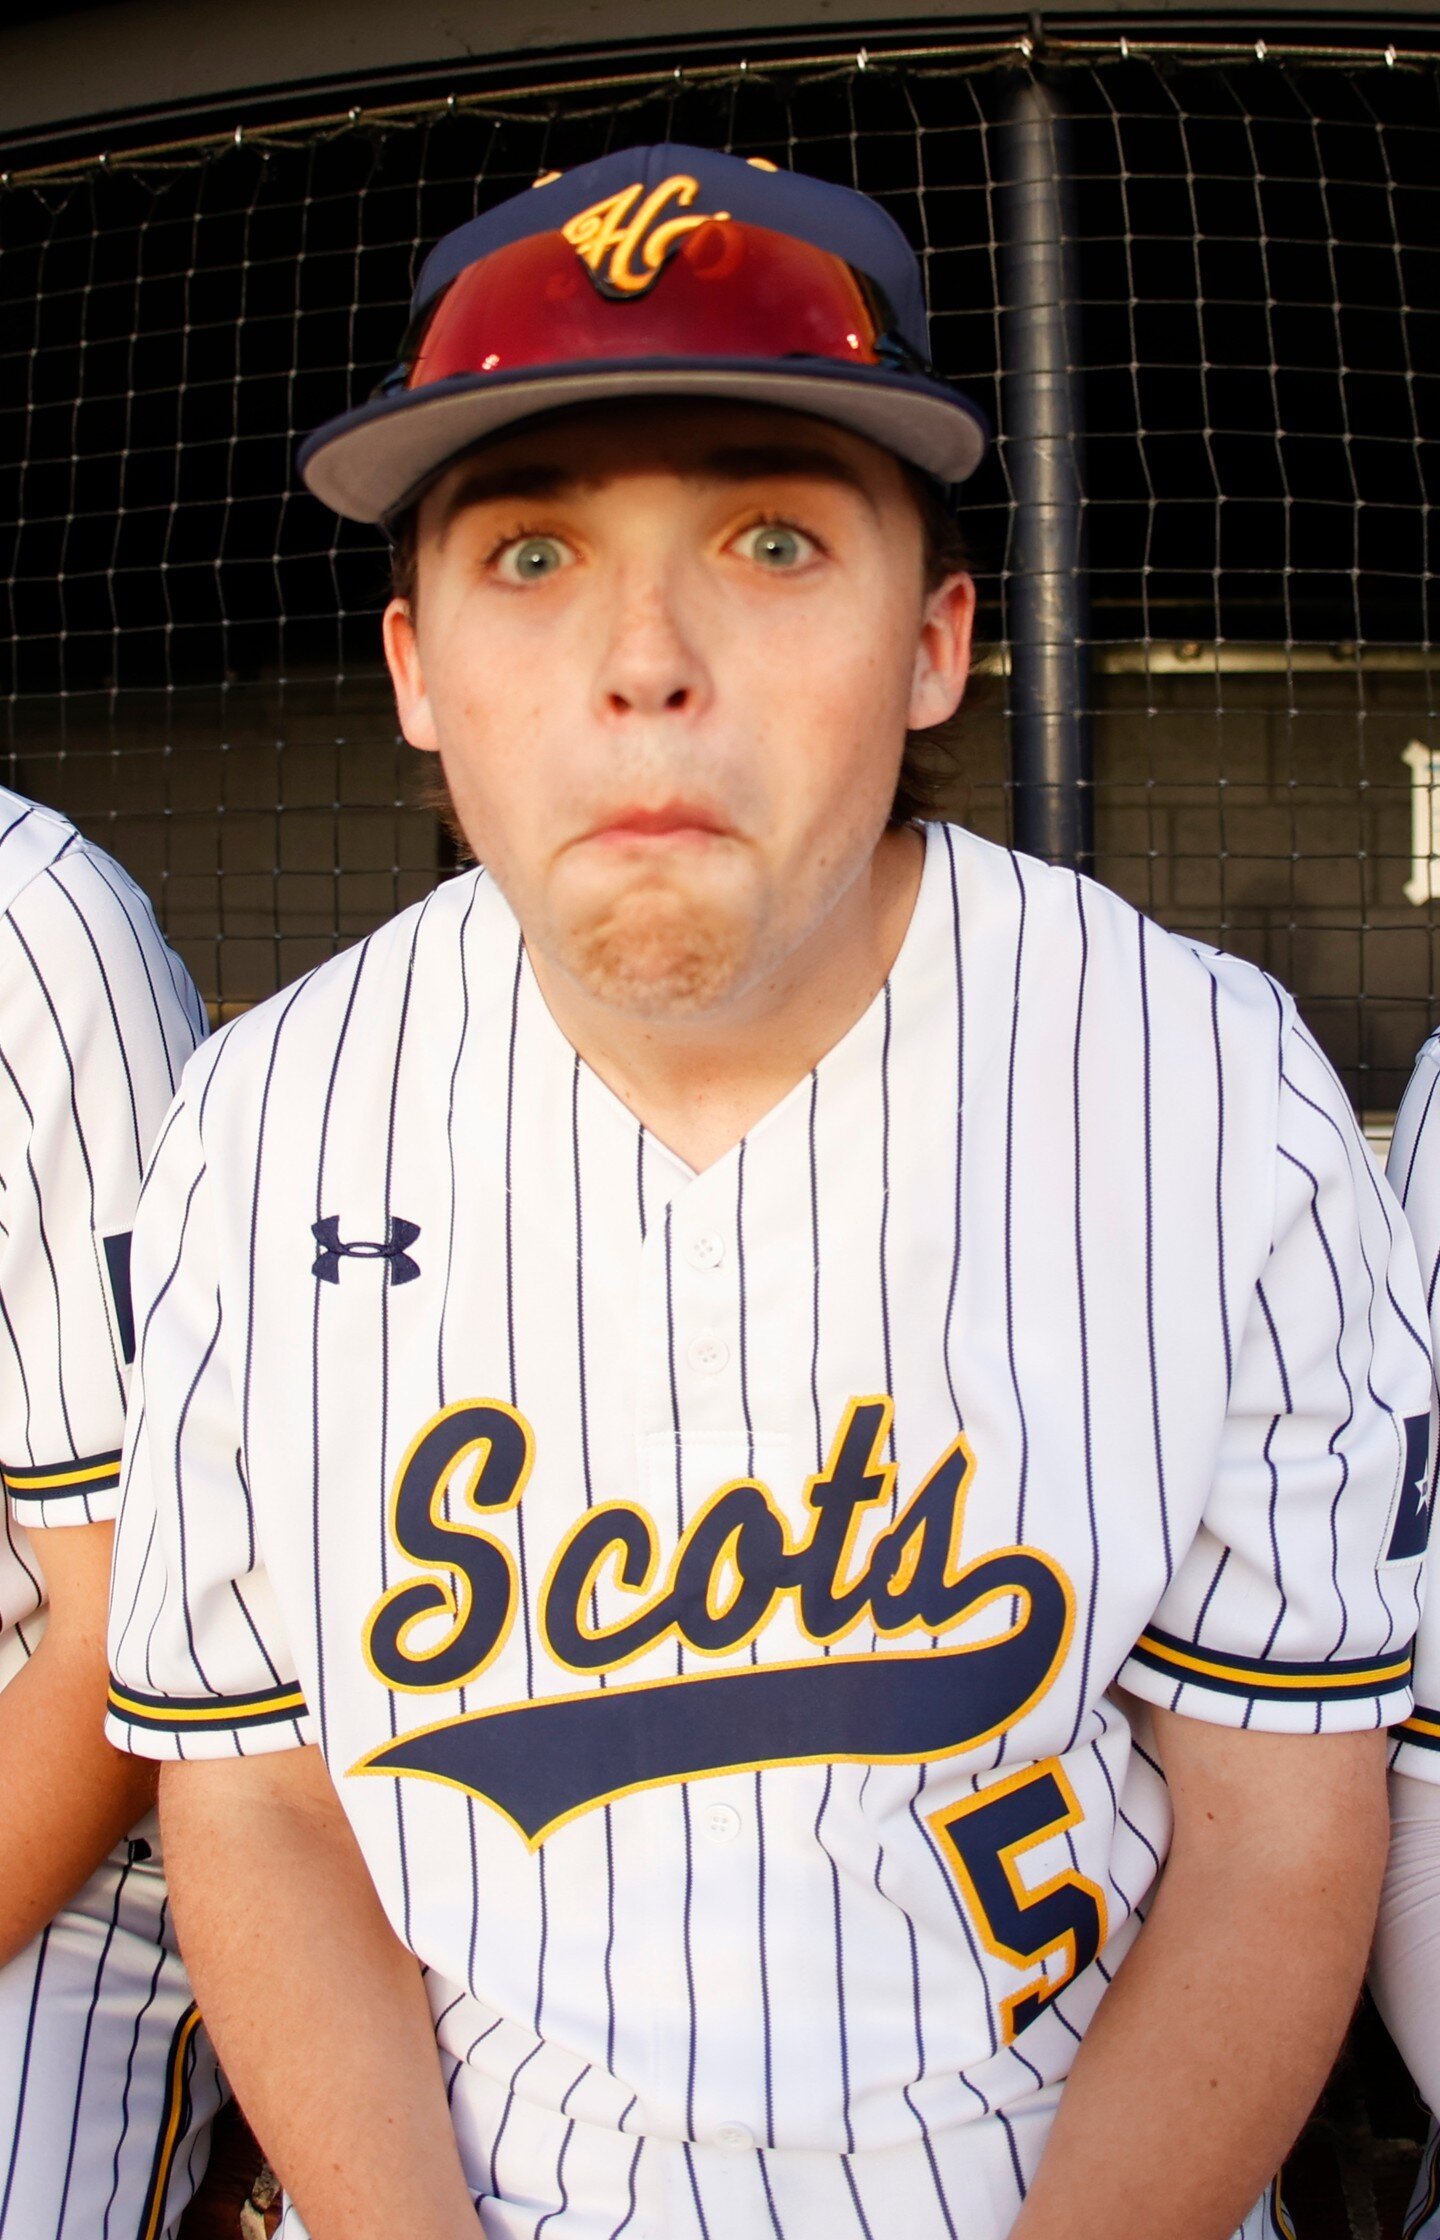 Gameday home Scots Varsity Baseball vs Richardson Eagles at 7:30pm tonight. Come out and see this expression and watch senior Jack Wall continue his hot streak of getting on base. He went 2-2 w/ 2 RBI's, and had 2 walks in the Scots 12-1 win vs MacAr